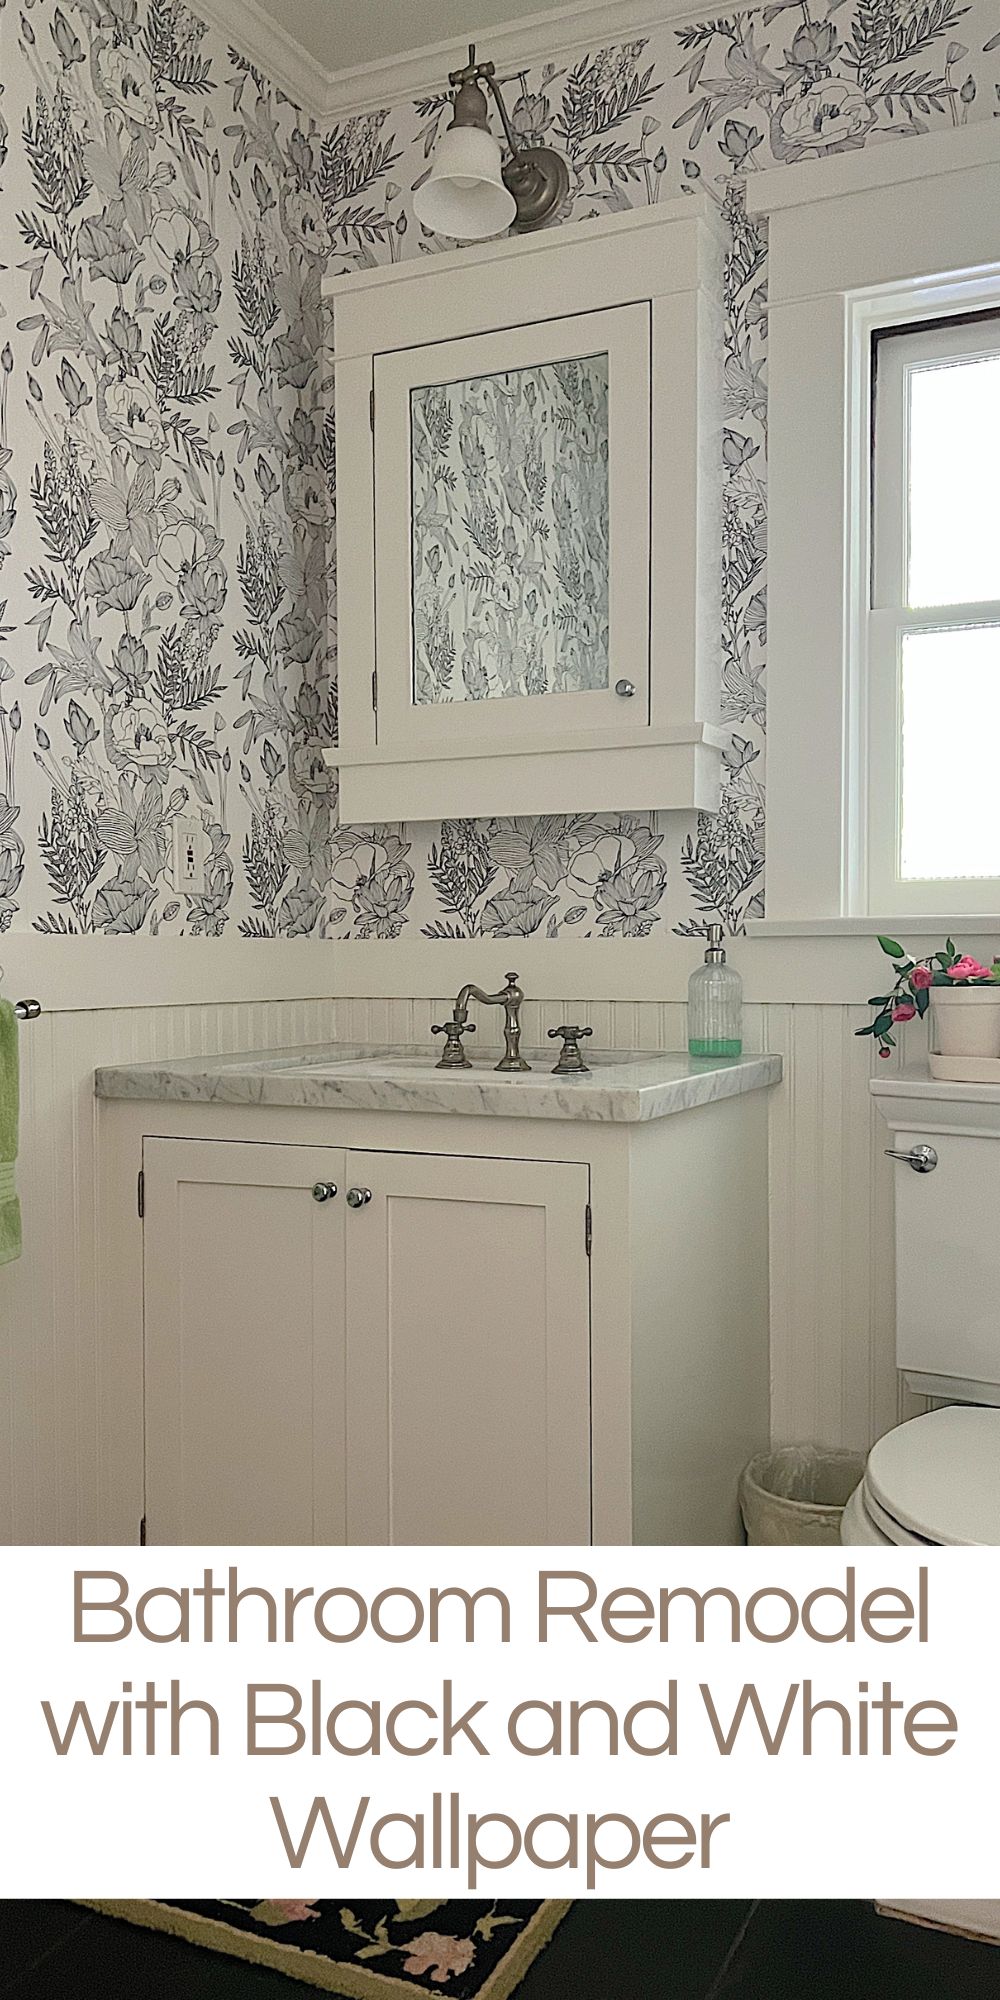 I did a quick remodel blast fall and pulled off a one-day bathroom remodel with black and white wallpaper.